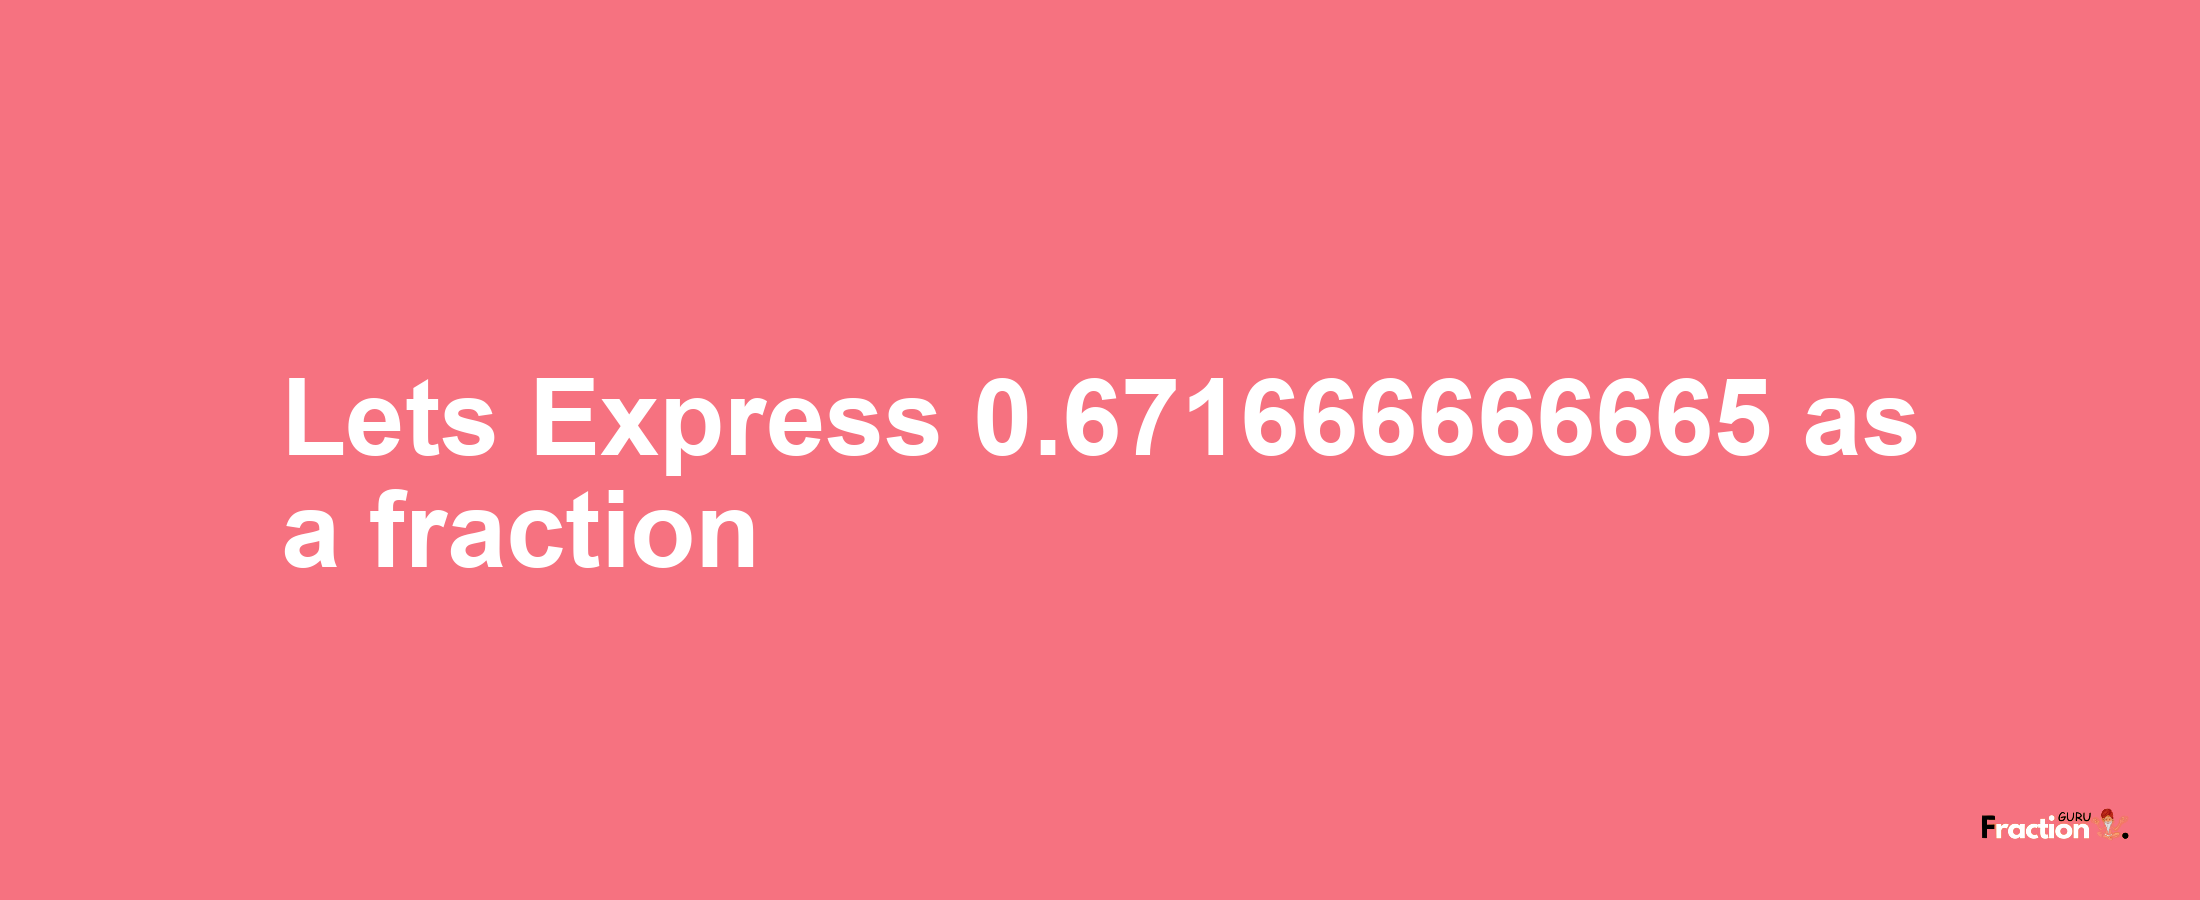 Lets Express 0.671666666665 as afraction